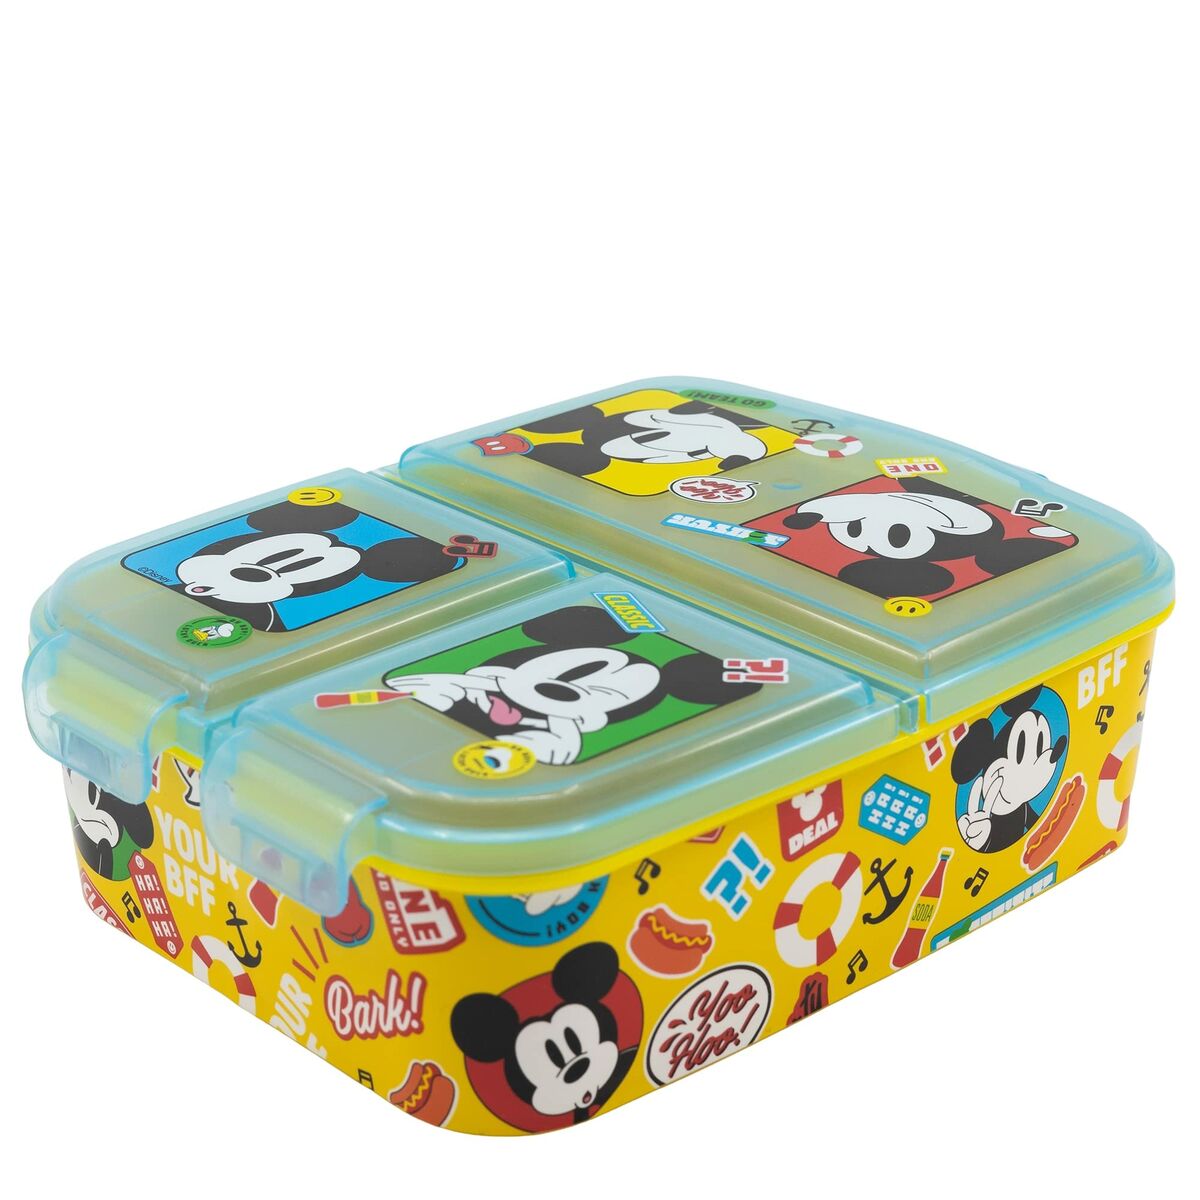 Compartment Lunchbox Mickey Mouse Fun-Tastic 19,5 x 16,5 x 6,7 cm polypropylene